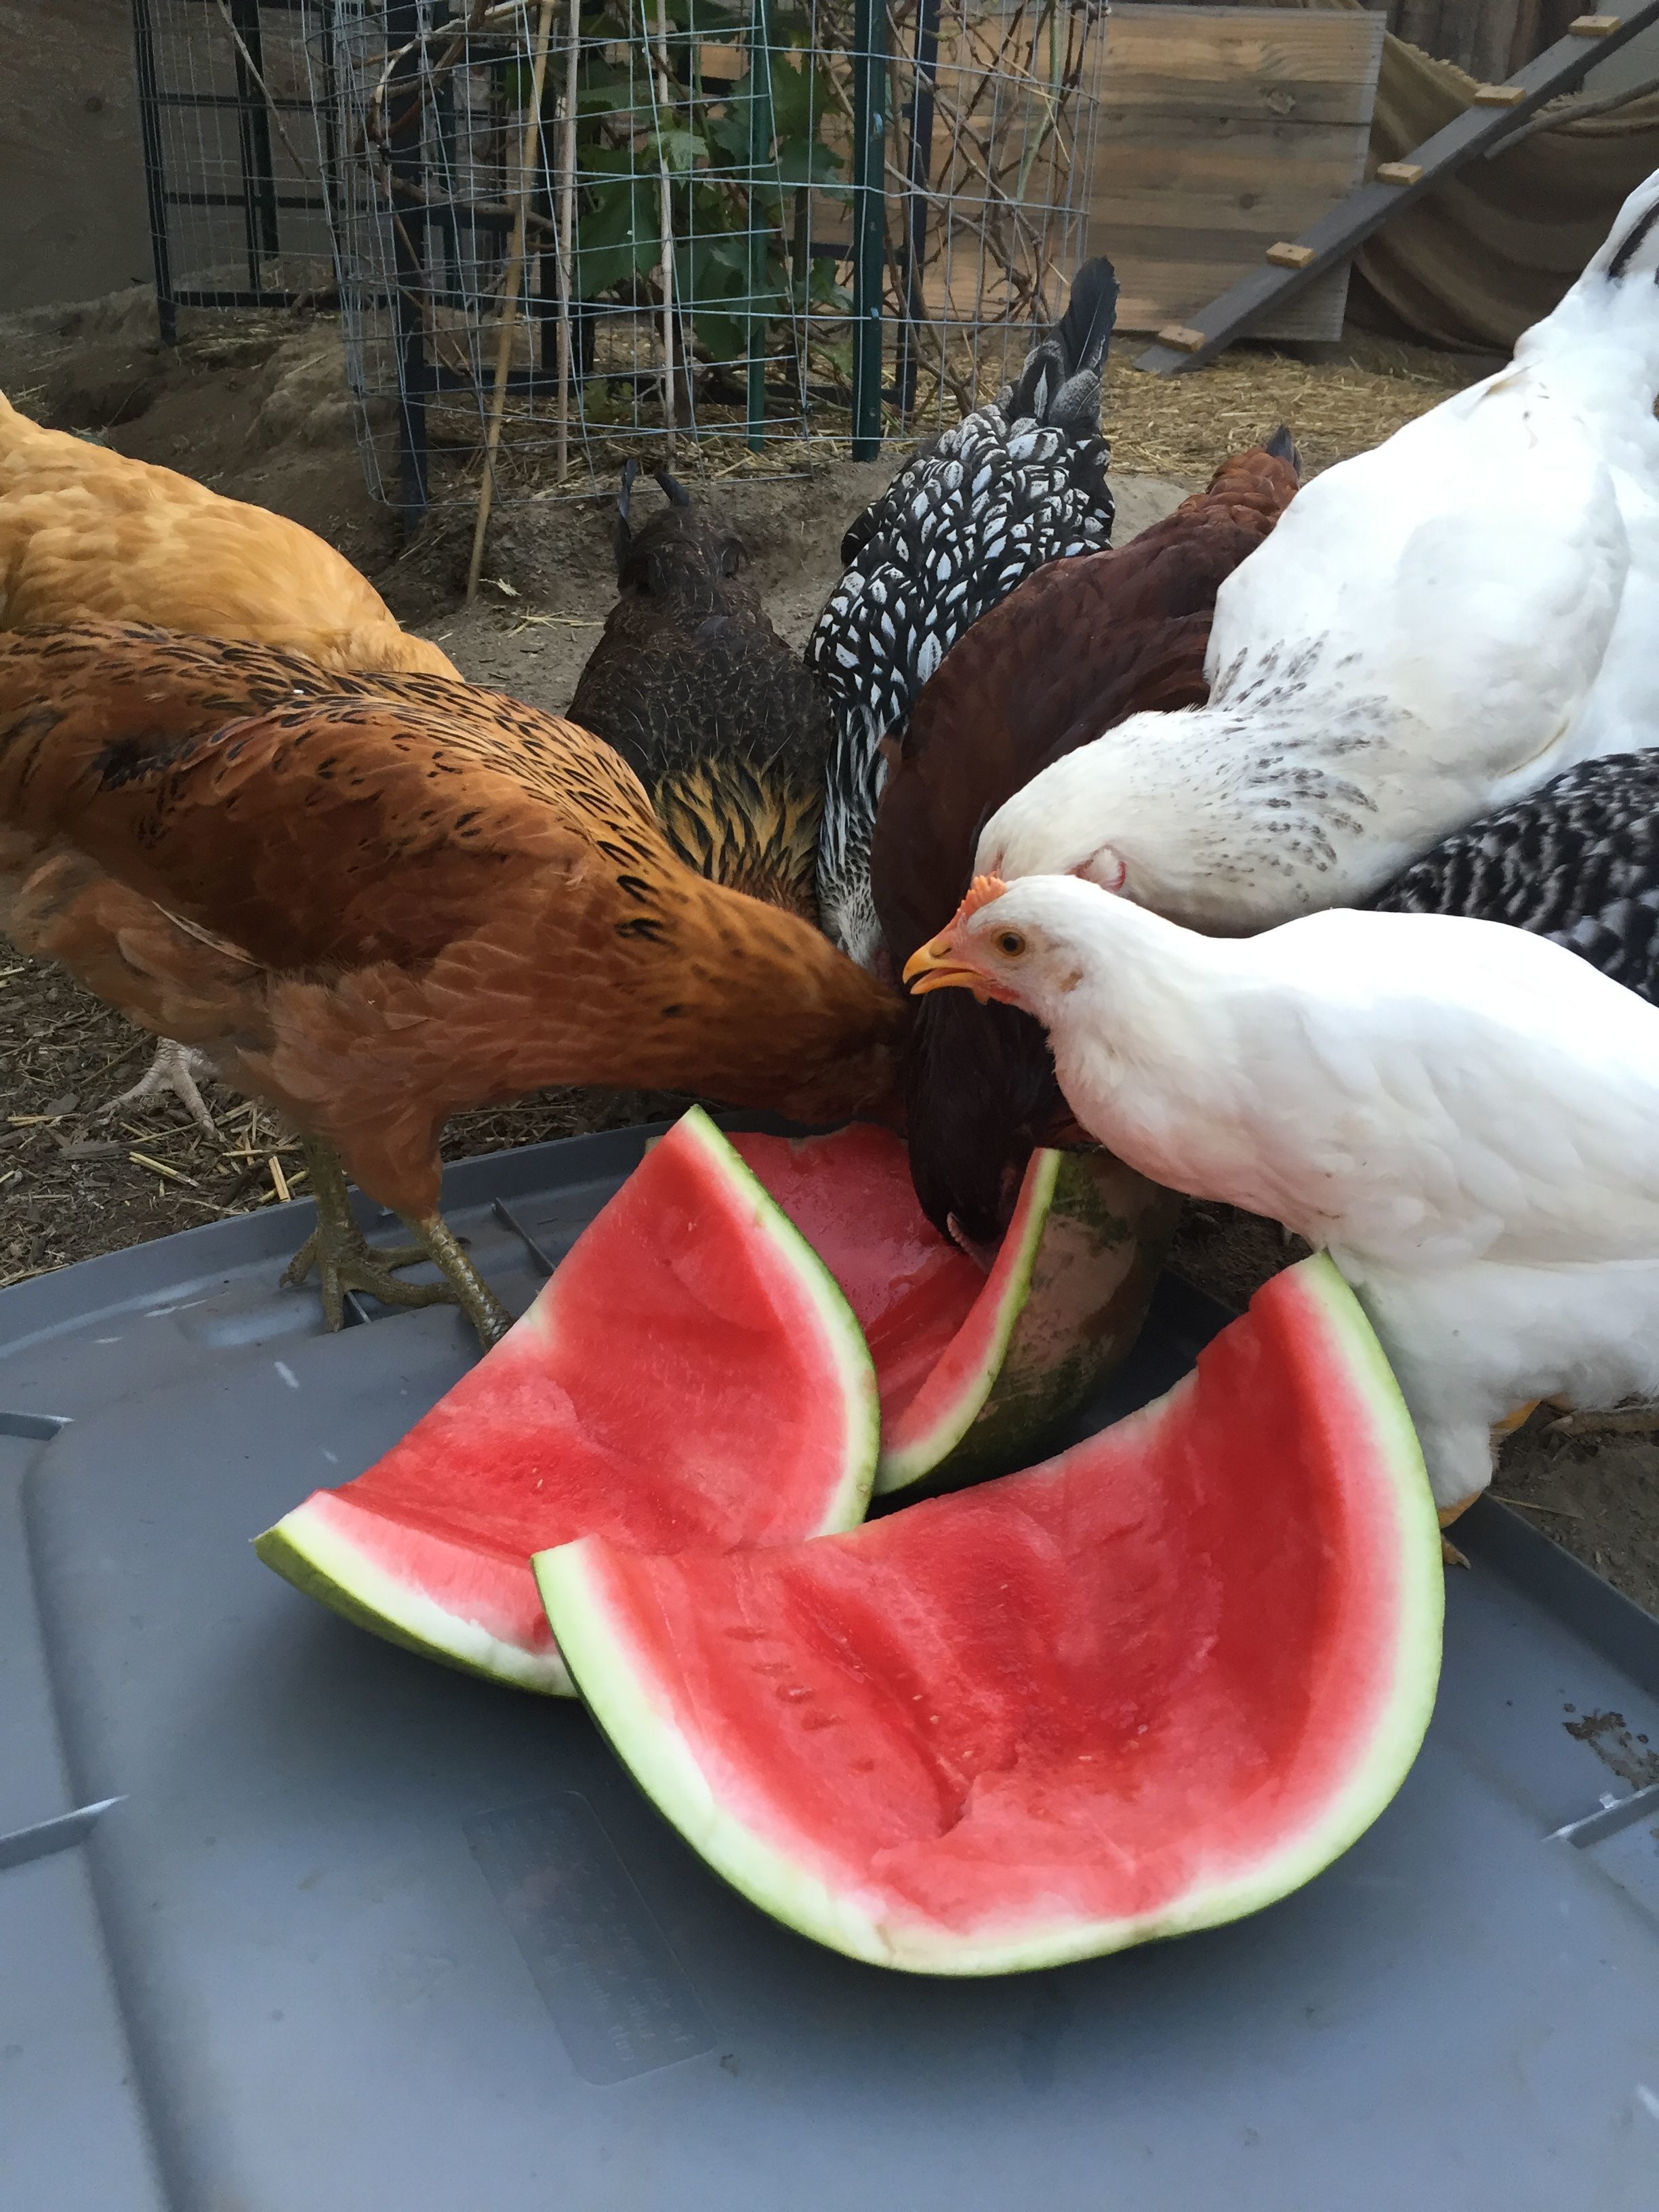 Our ladies got some kitchen leftovers this morning and they were loving it! I was hoping there would be some left to add to the compost but they ate almost everything I put out